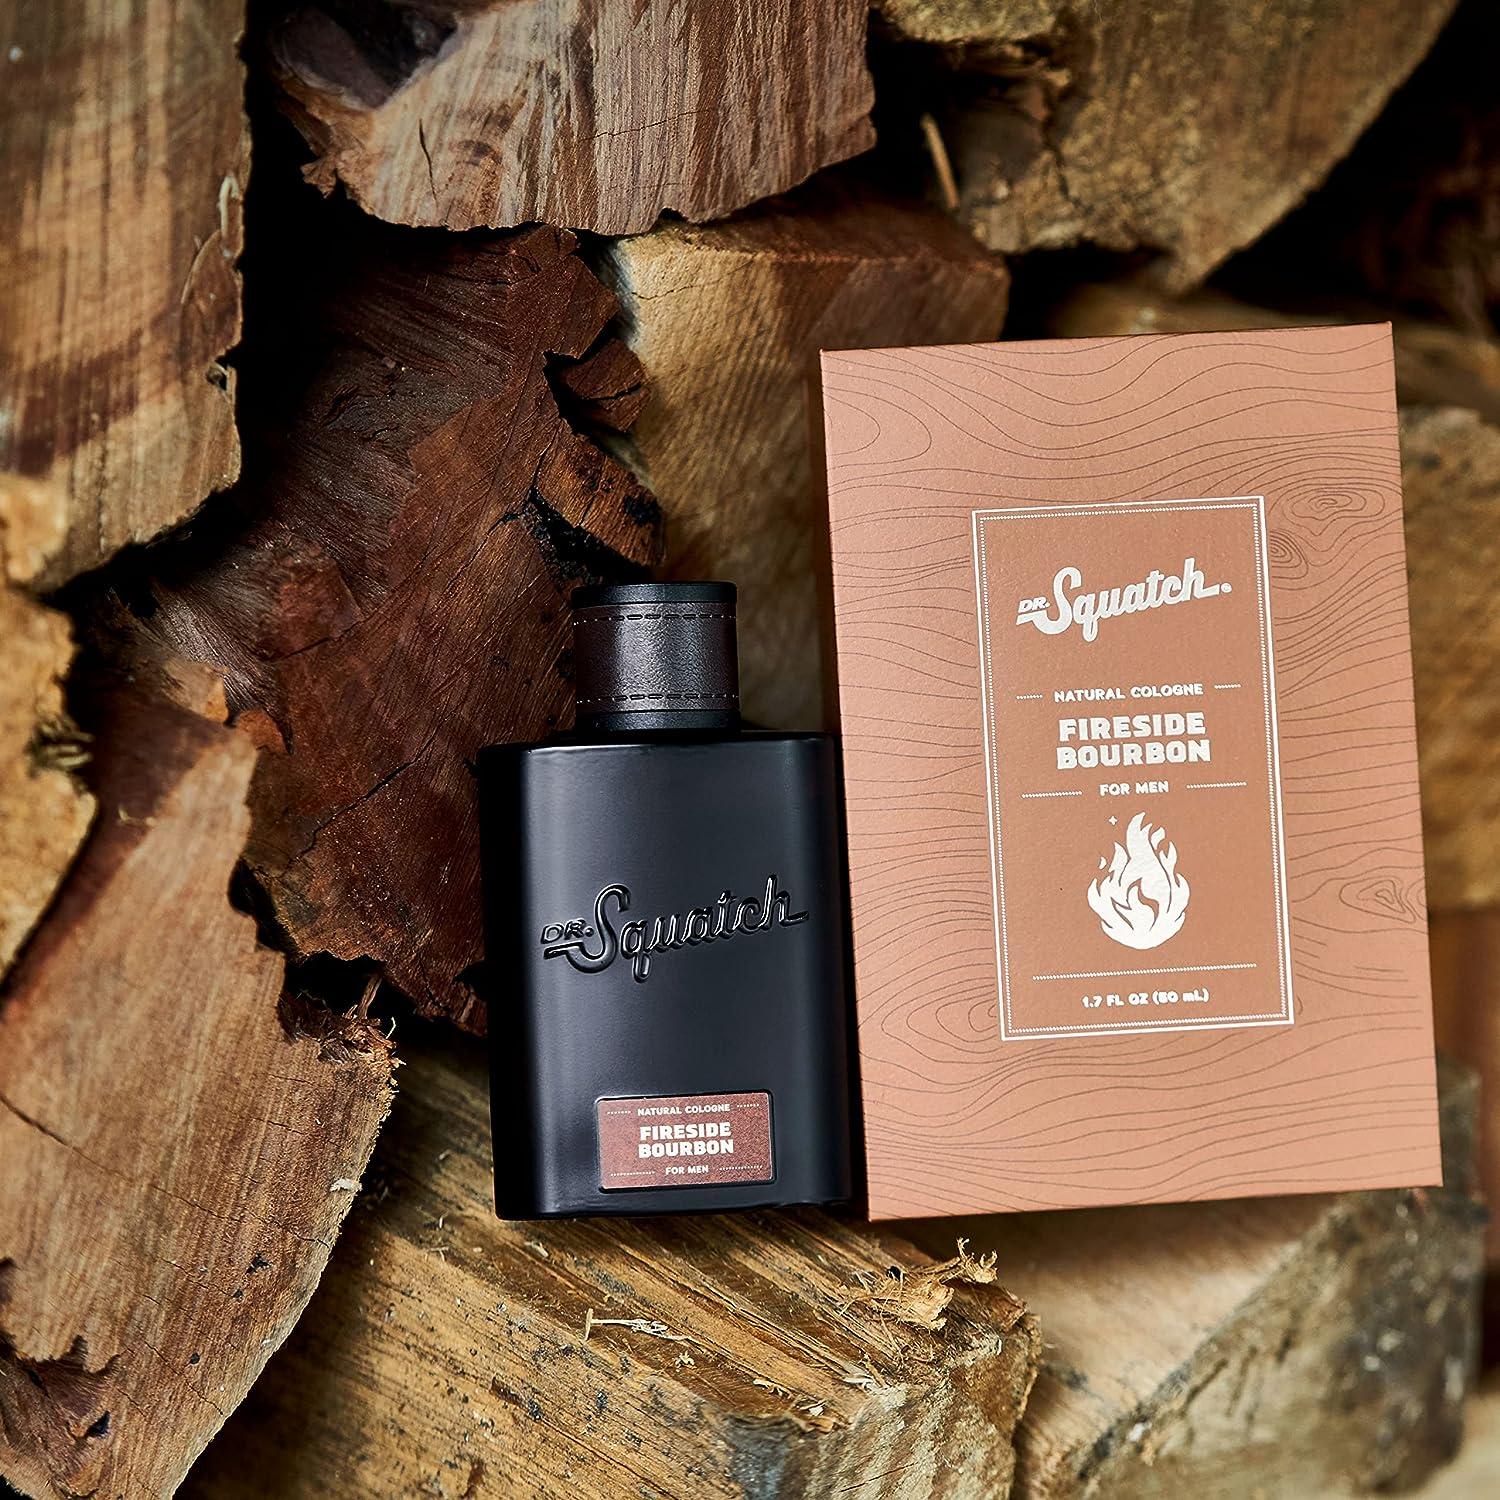 Dr. Squatch Men's Cologne Glacial Falls - Natural Cologne made with  sustainably-sourced ingredients - Manly fragrance of bergamot, clove, and  cedar 